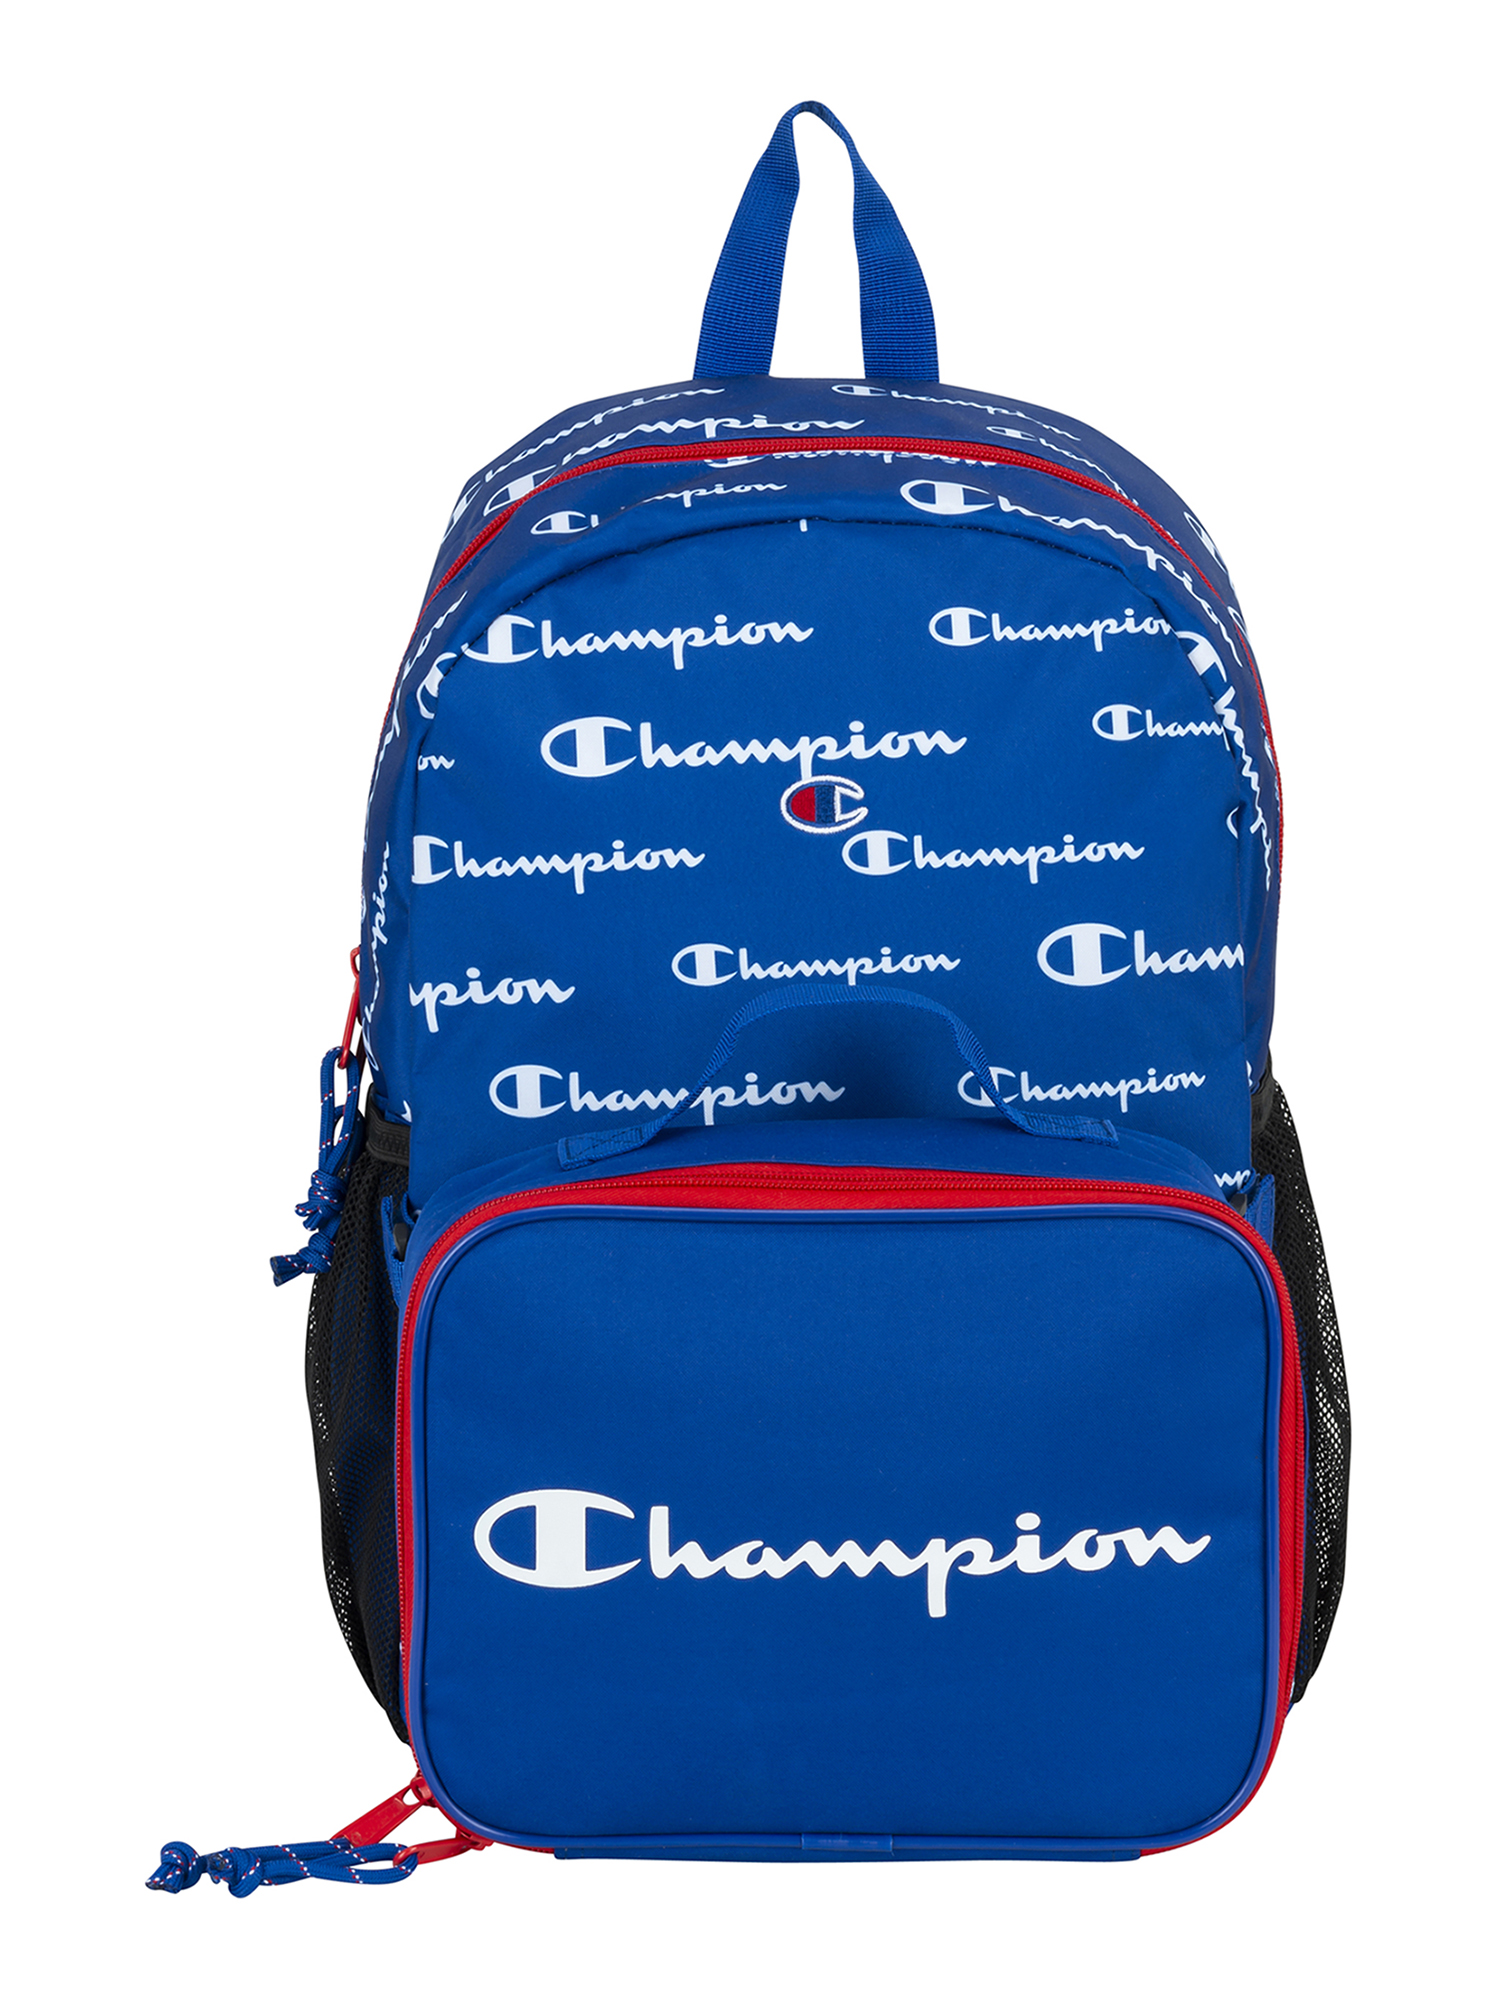 Champion Youth Backpack with Lunch Bag - image 3 of 4